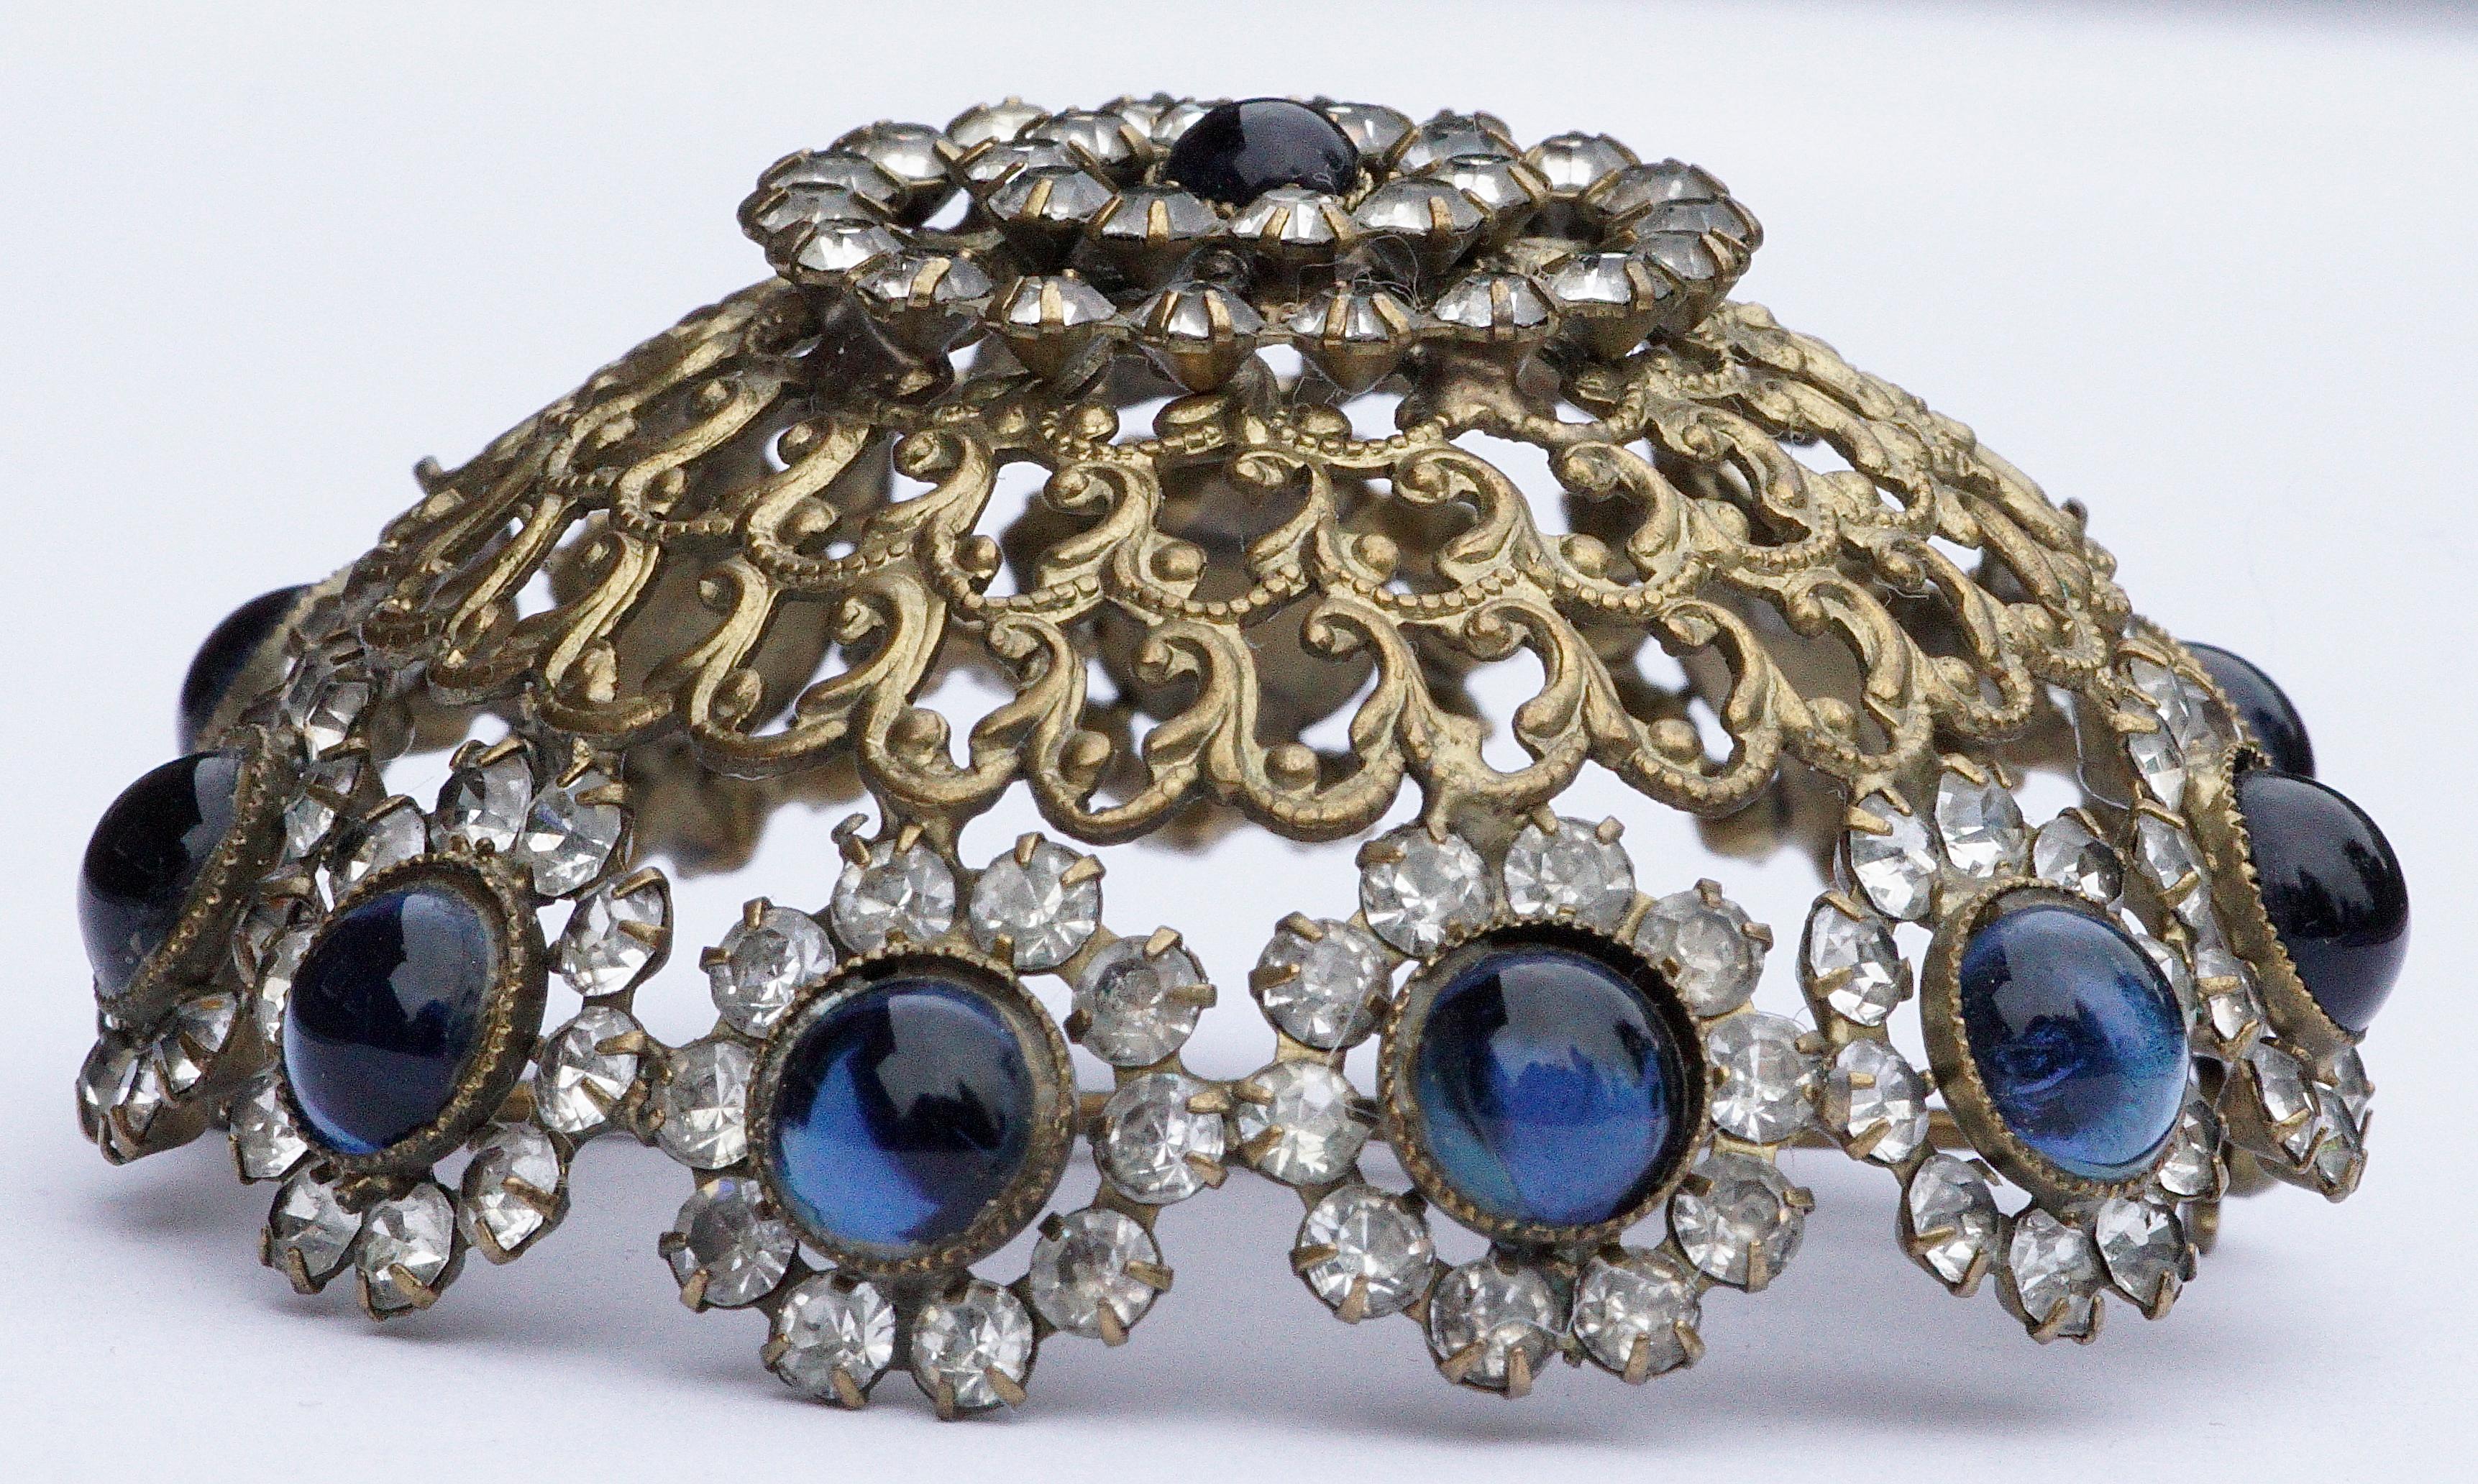 Wonderful Alice Caviness dome brooch with golden metal swirl detail, and featuring blue glass cabochons and faceted clear rhinestones. The brooch measures diameter 5.5cm / 2.16 inches by height approximately 1.8cm / .71 inch.

This is a fabulous and